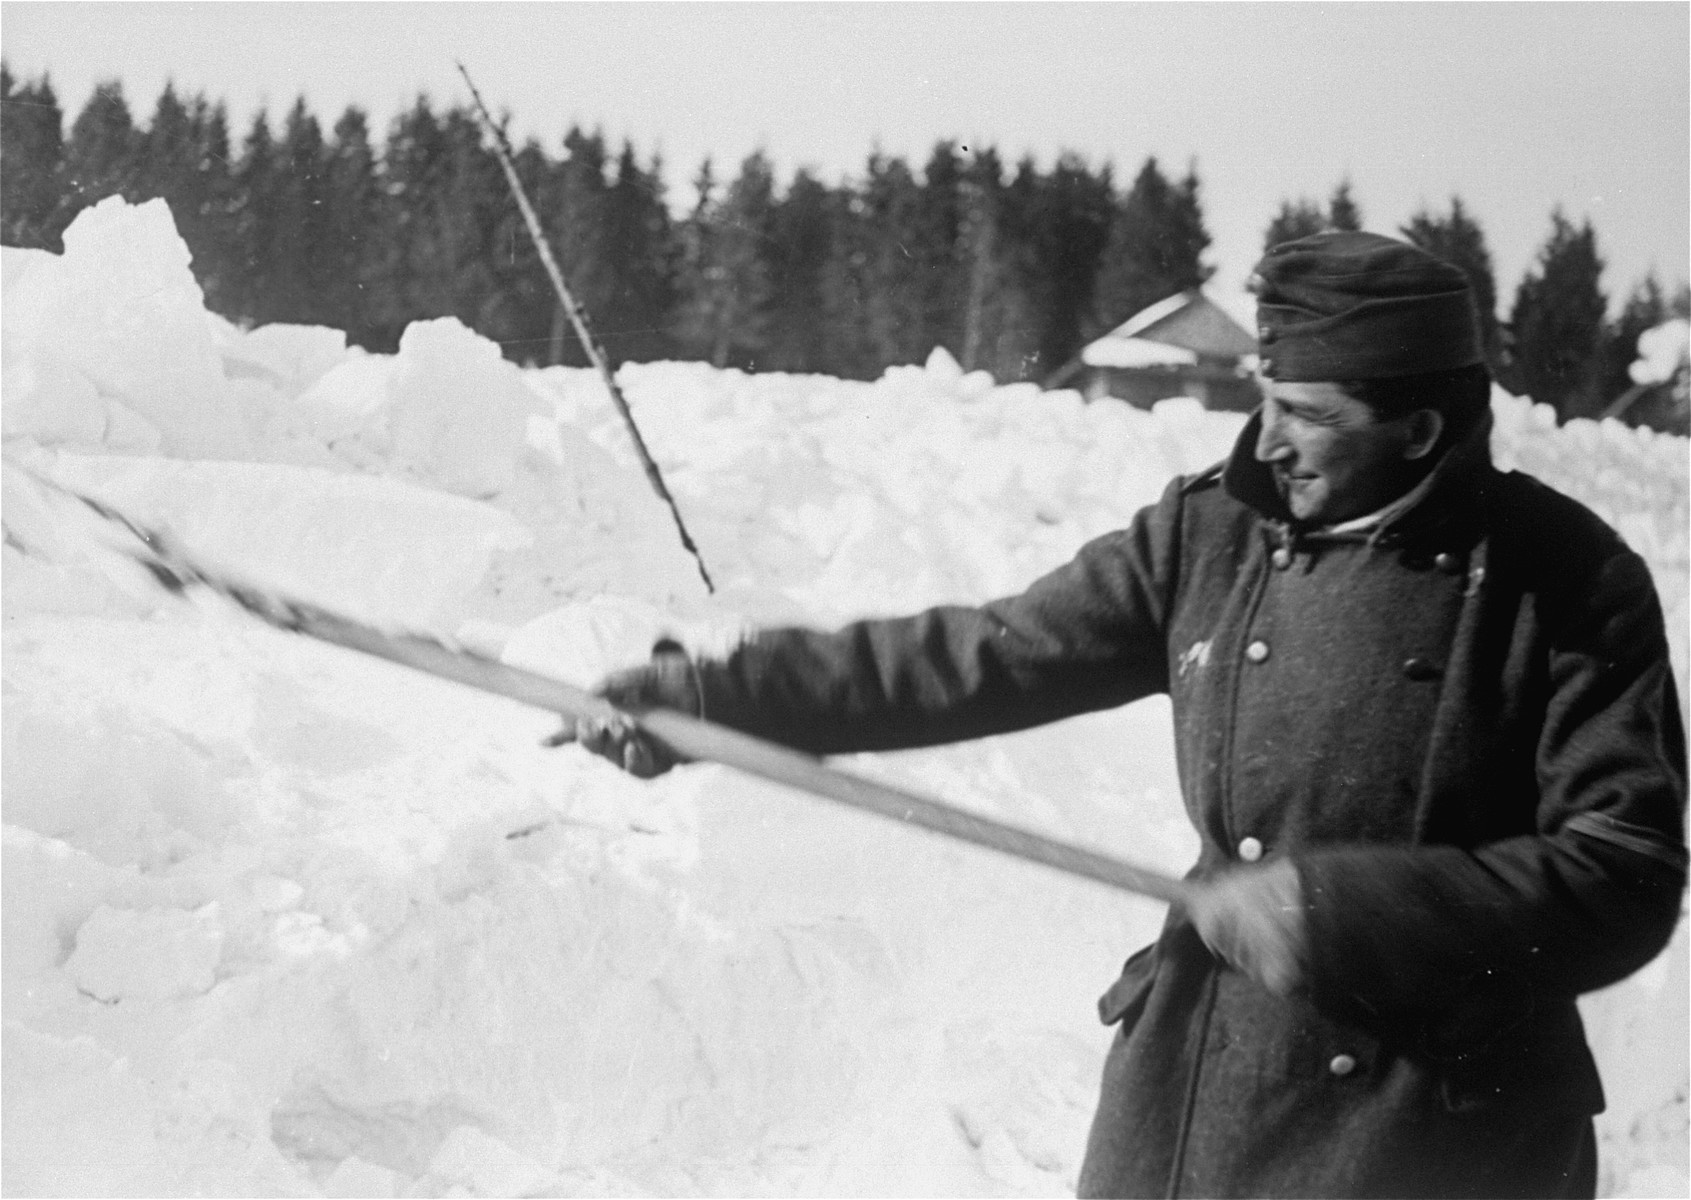 A Jewish conscript in Company 108/57 of the Hungarian Labor Service clearing snow from a road.